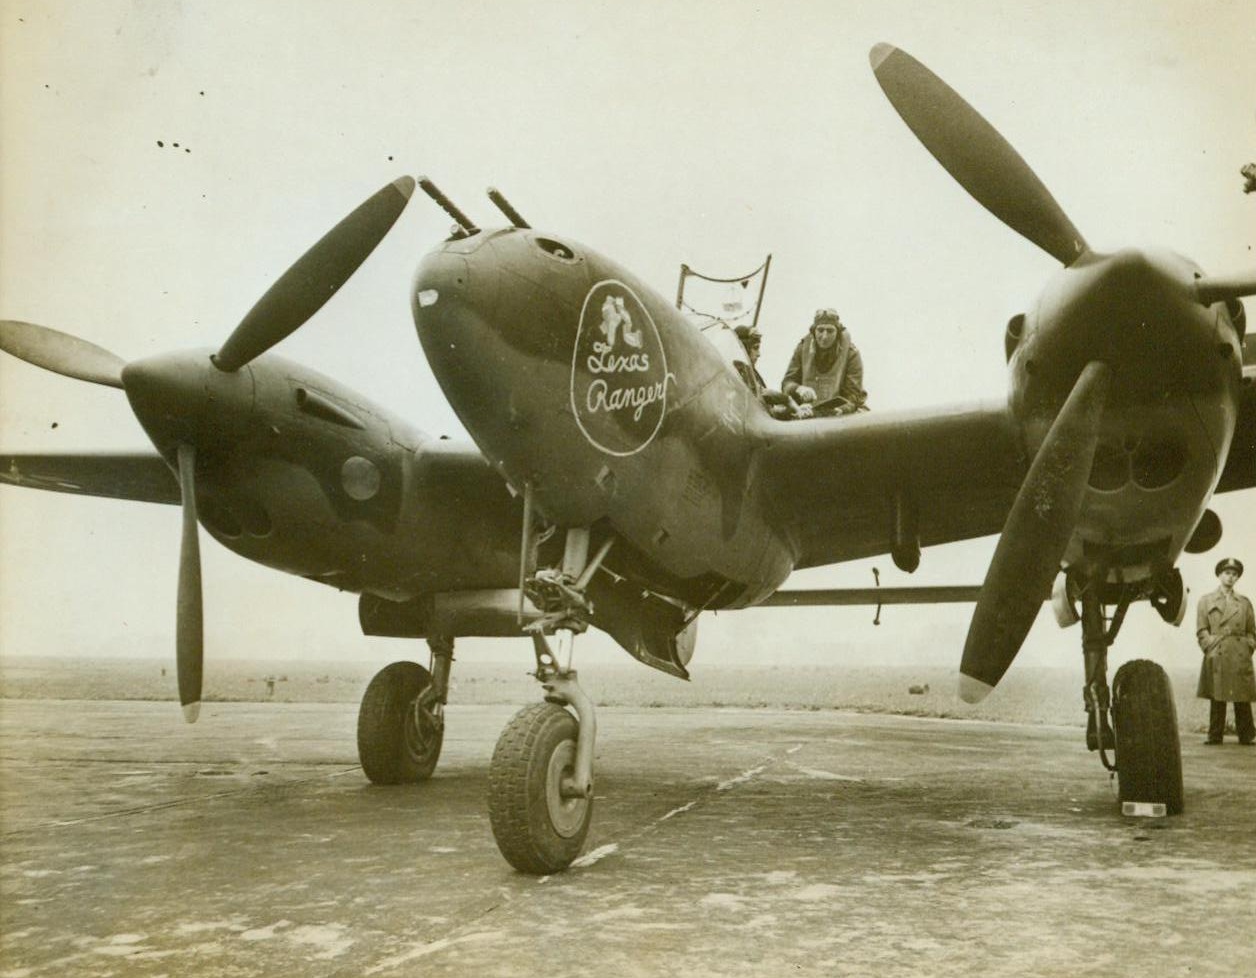 All Duty U.S. Plane In Britain, 11/1/1943. England – The lightning P-38, one of the most useful of all types of U.S.A.A.F. planes, now operates from bases in Britain. Lt. Col. Jack S. Jenkins, of Levelland, Texas, commanding officer of a U.S. Air Force station in Britain, is in the cockpit of his P-38 “Texas Ranger” just before the take-off. The two-engined high-wing monoplane performs many sky war tasks, as it is a fighter-bomber, low-level attack plane, and reconnaissance aircraft. 11/1/43 (ACME);